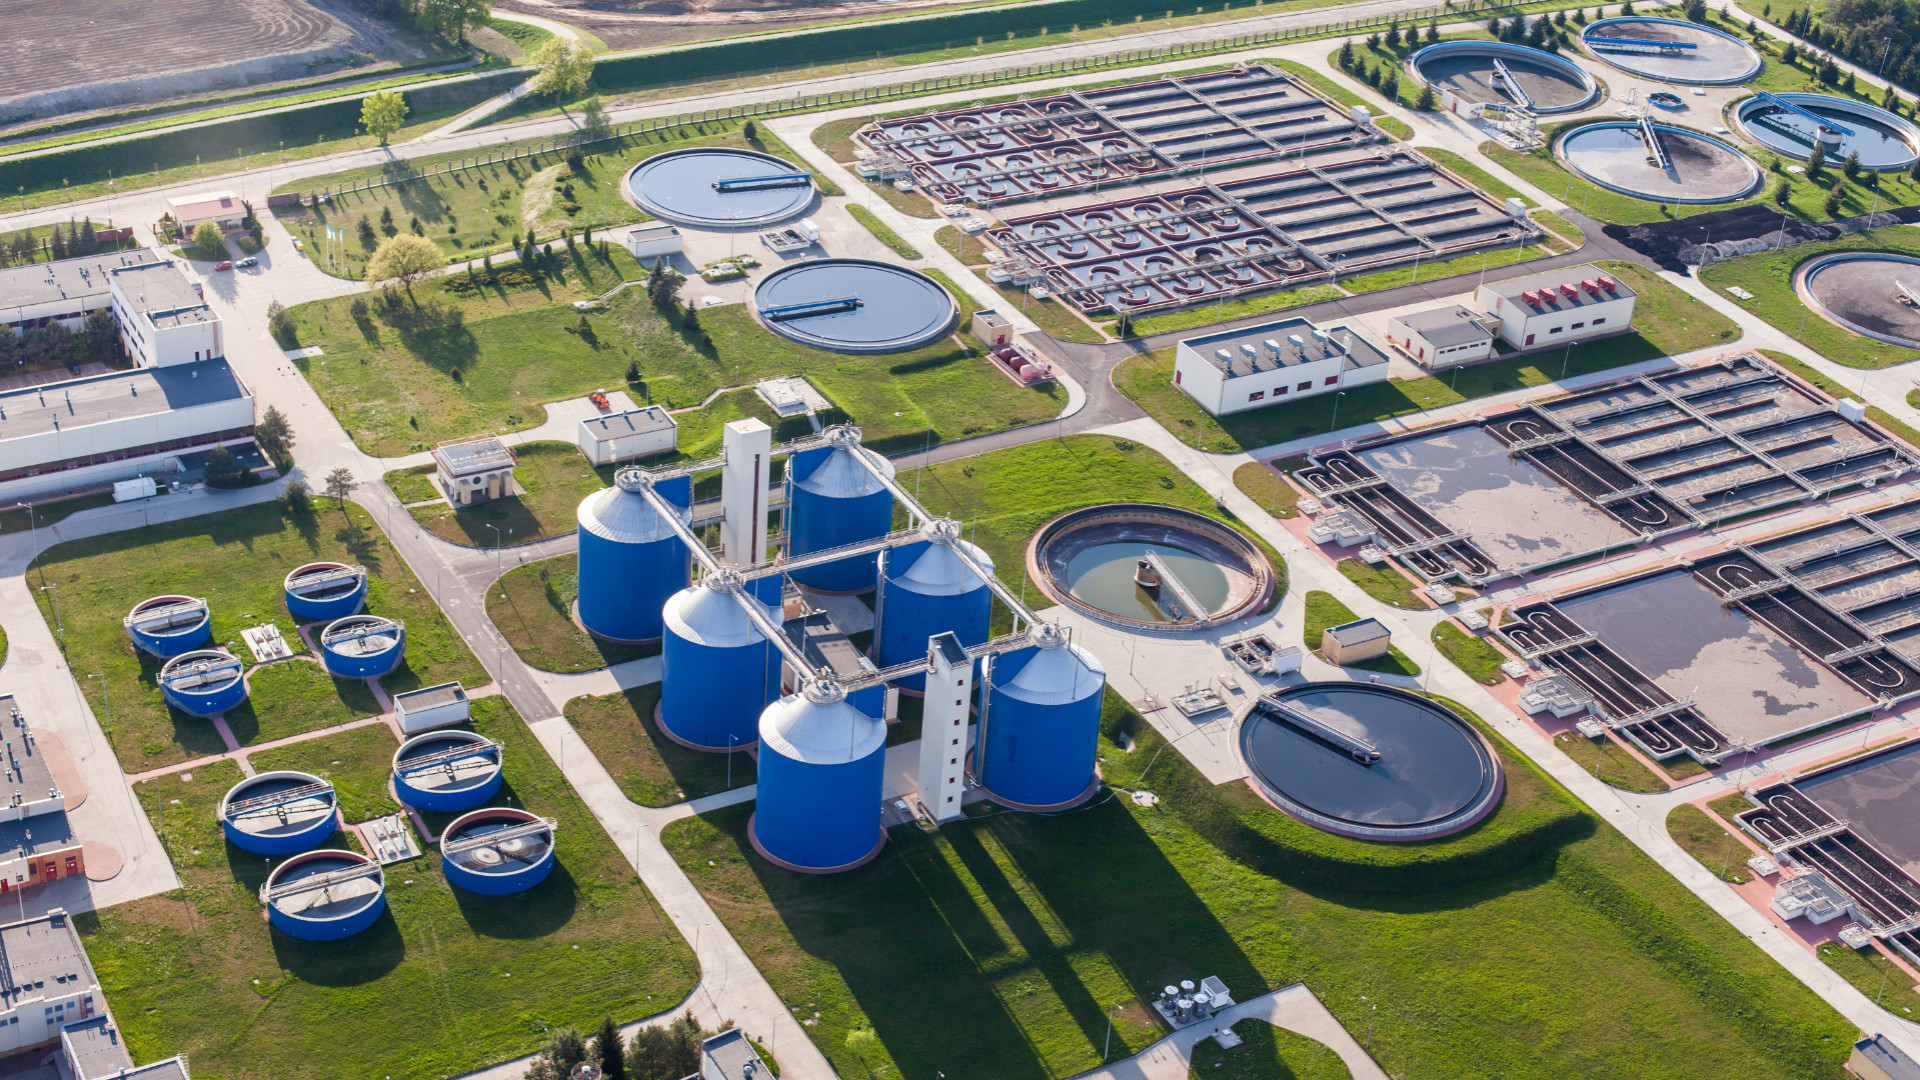 Water treatment plant aerial view to show how the plant used Transcyko speed reducers and gearboxes in their control systems